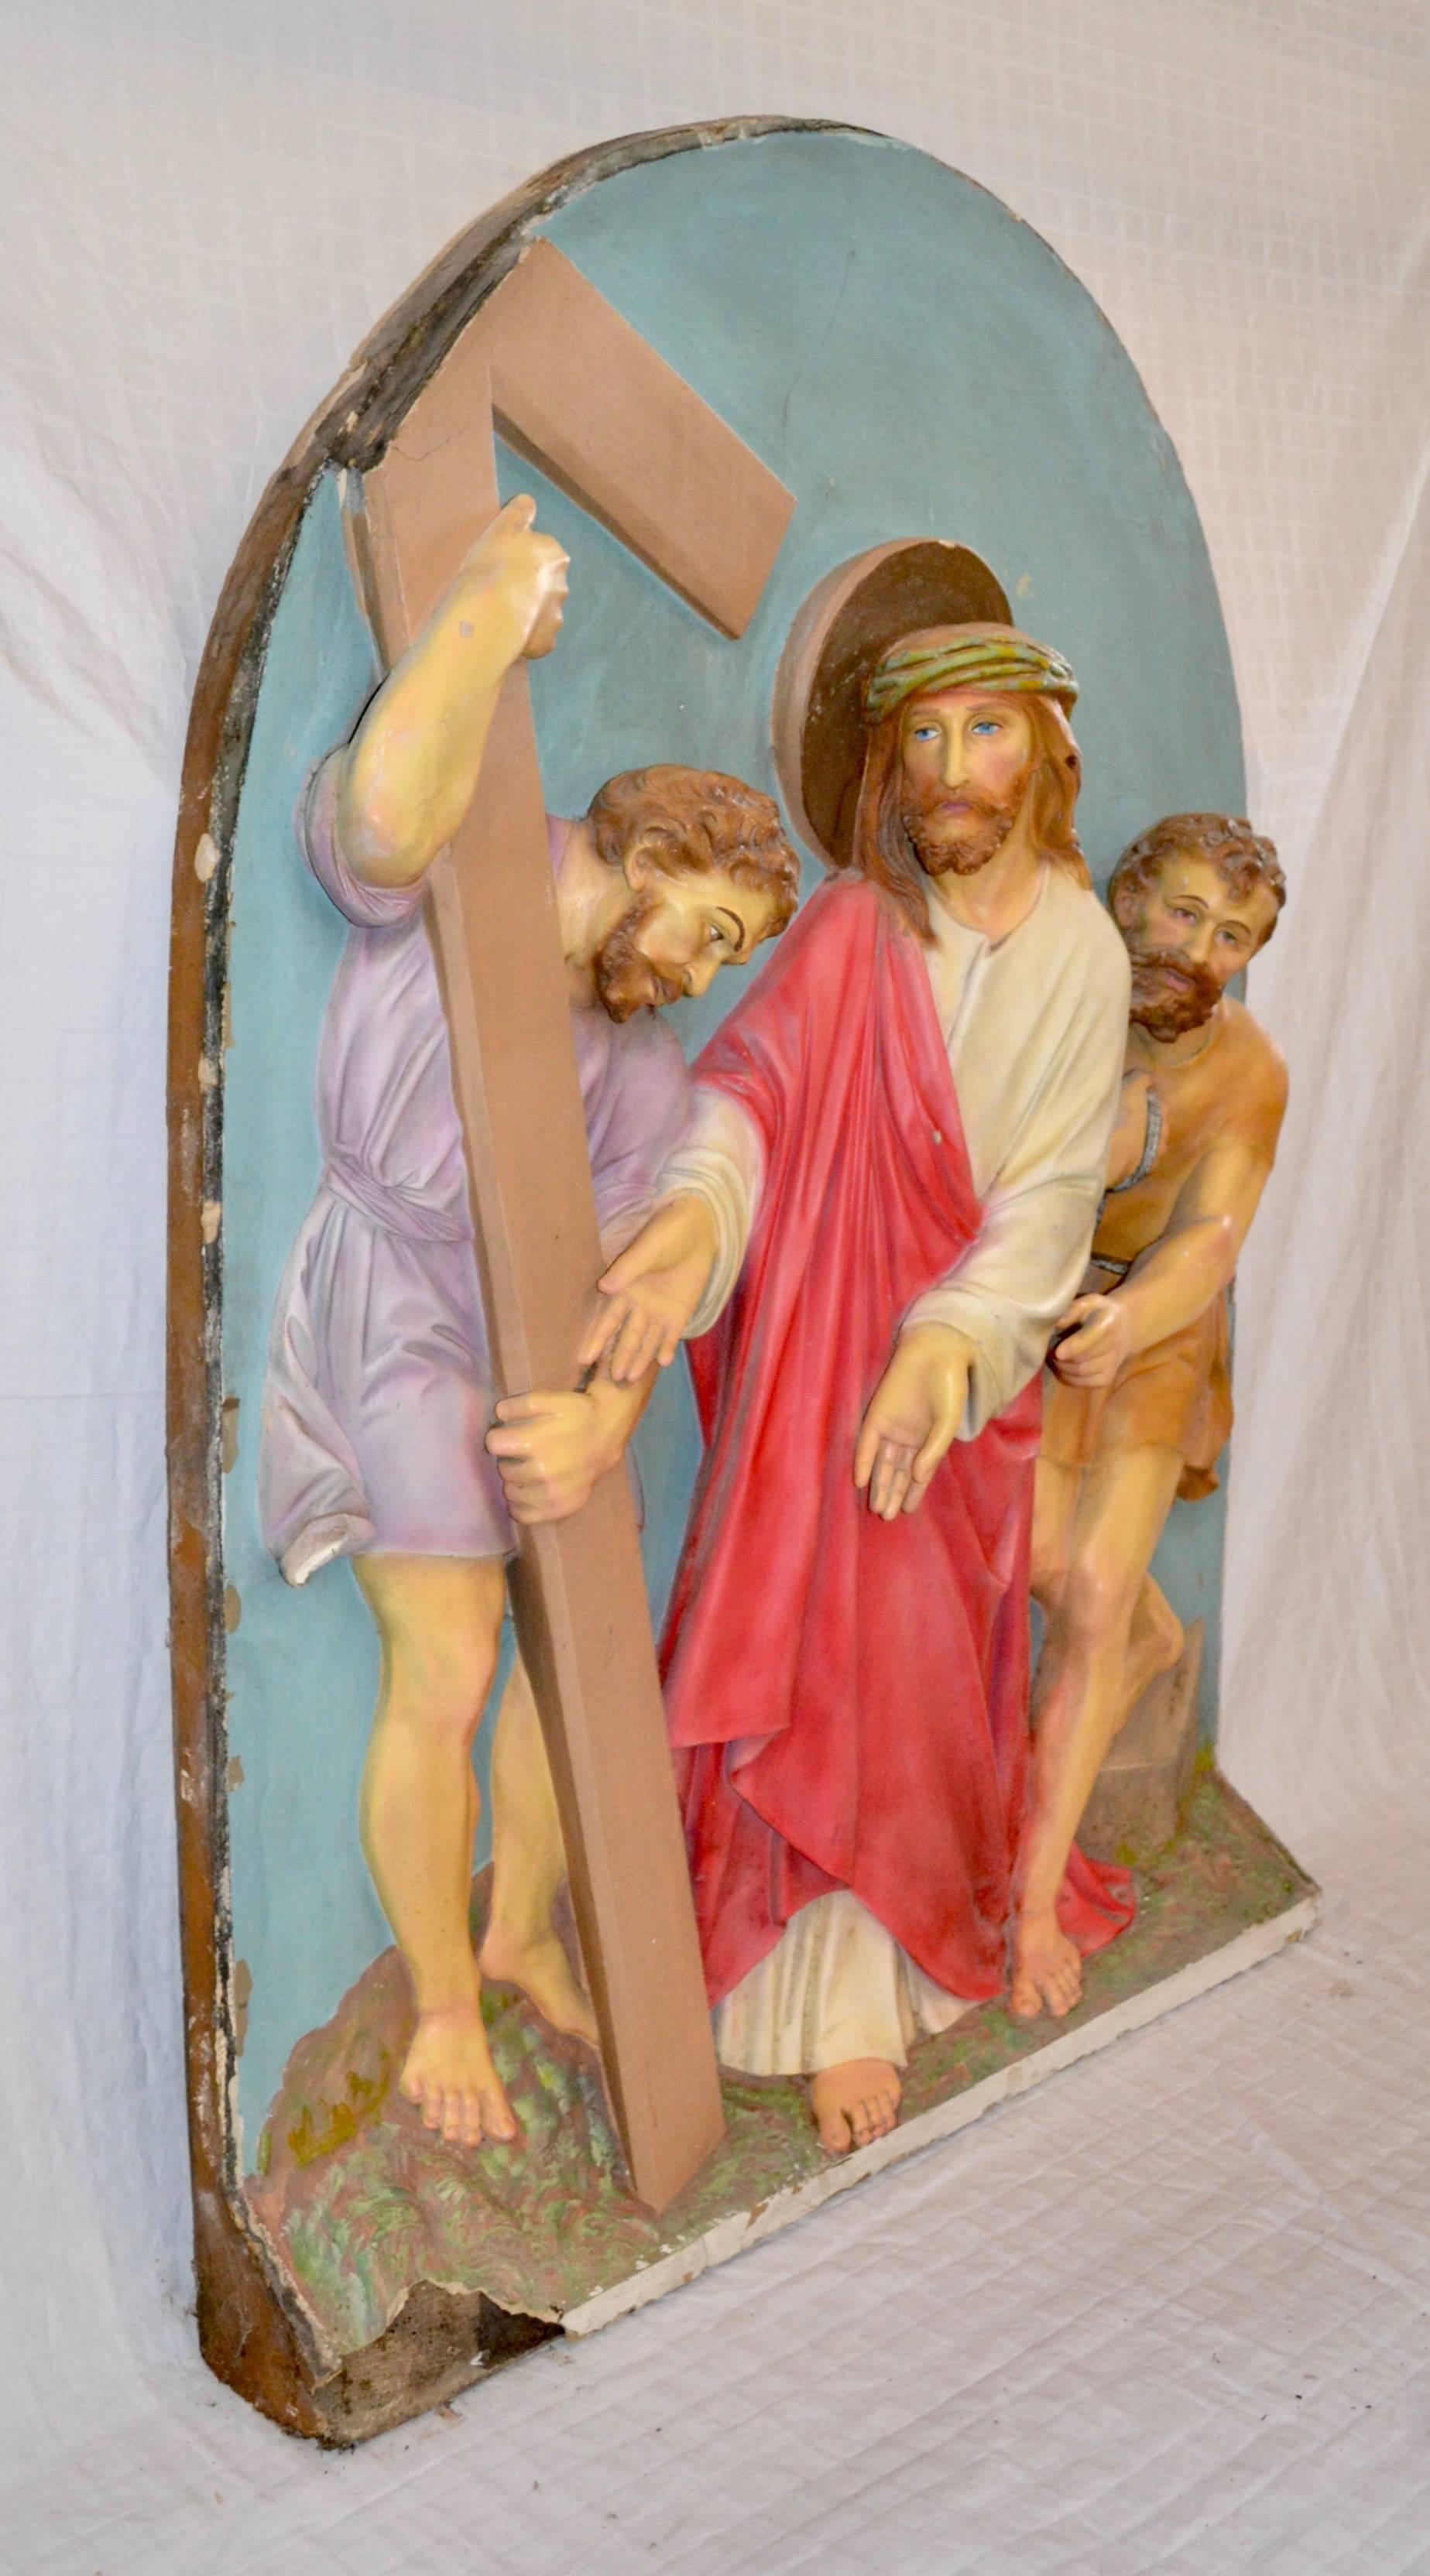 These unusual stations of the Cross are possible De Prado Studios. The panels are in good condition with some minor losses. The vibrant colors are consistent with and characteristic of a midcentury repaint. Panel shown is one of eight remaining with